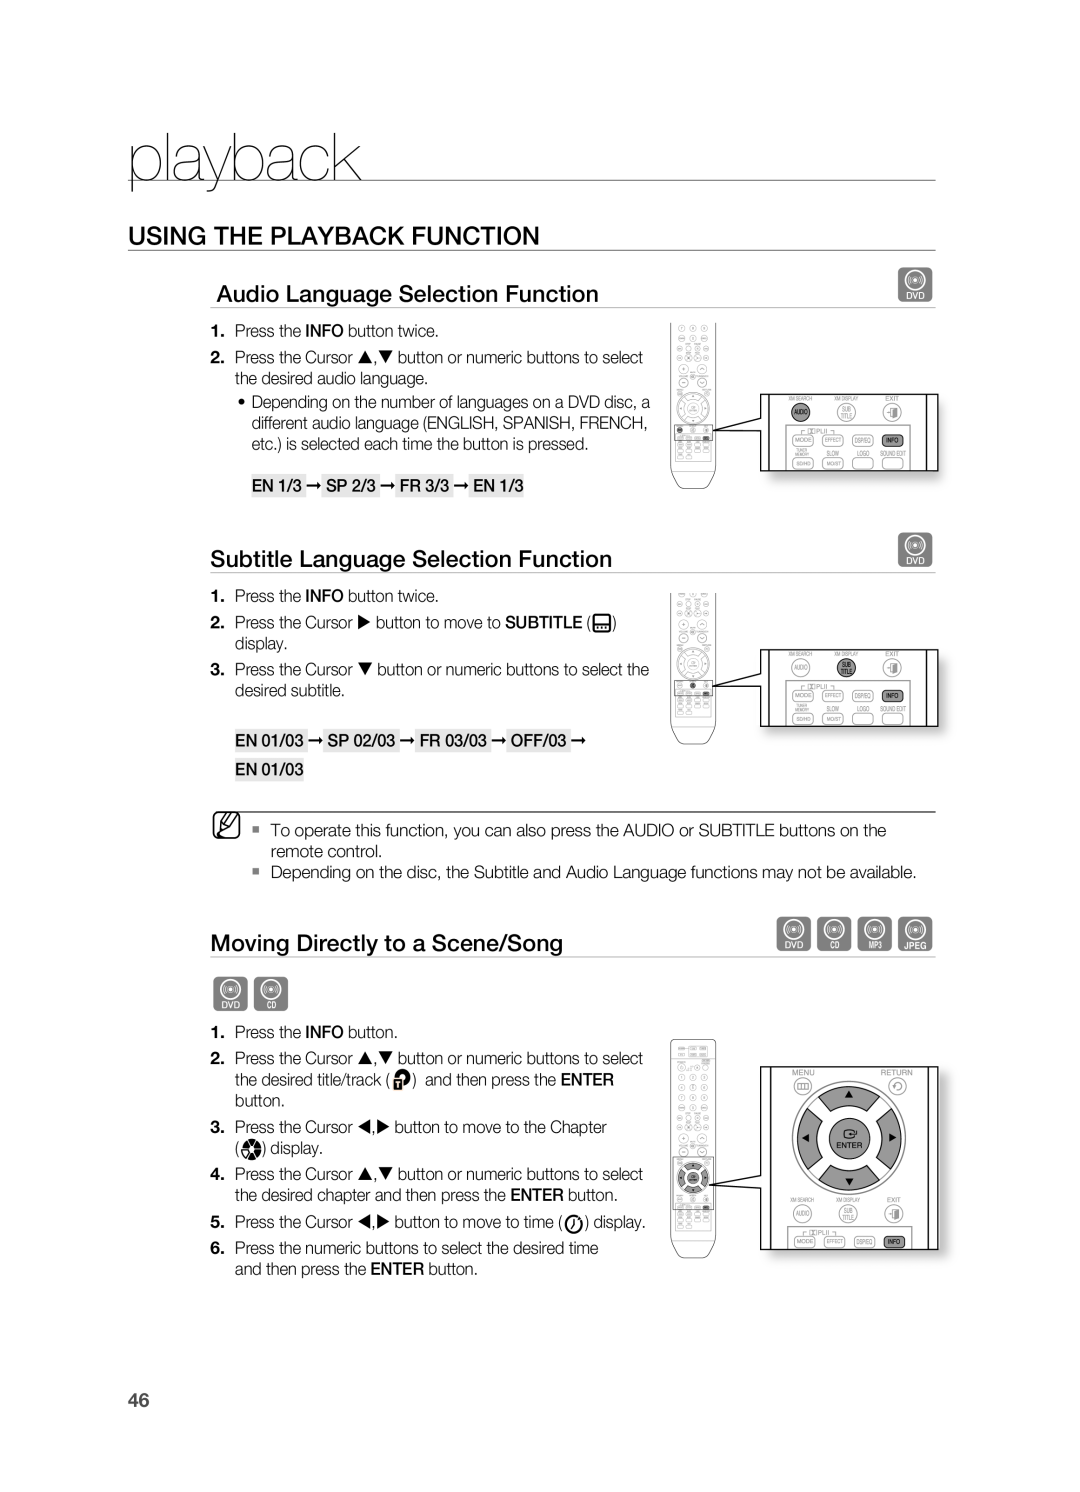 Samsung HT-Z510 manual dBAG, playback, USINg THE PLAYBACK FUNCTION, Audio Language Selection Function 